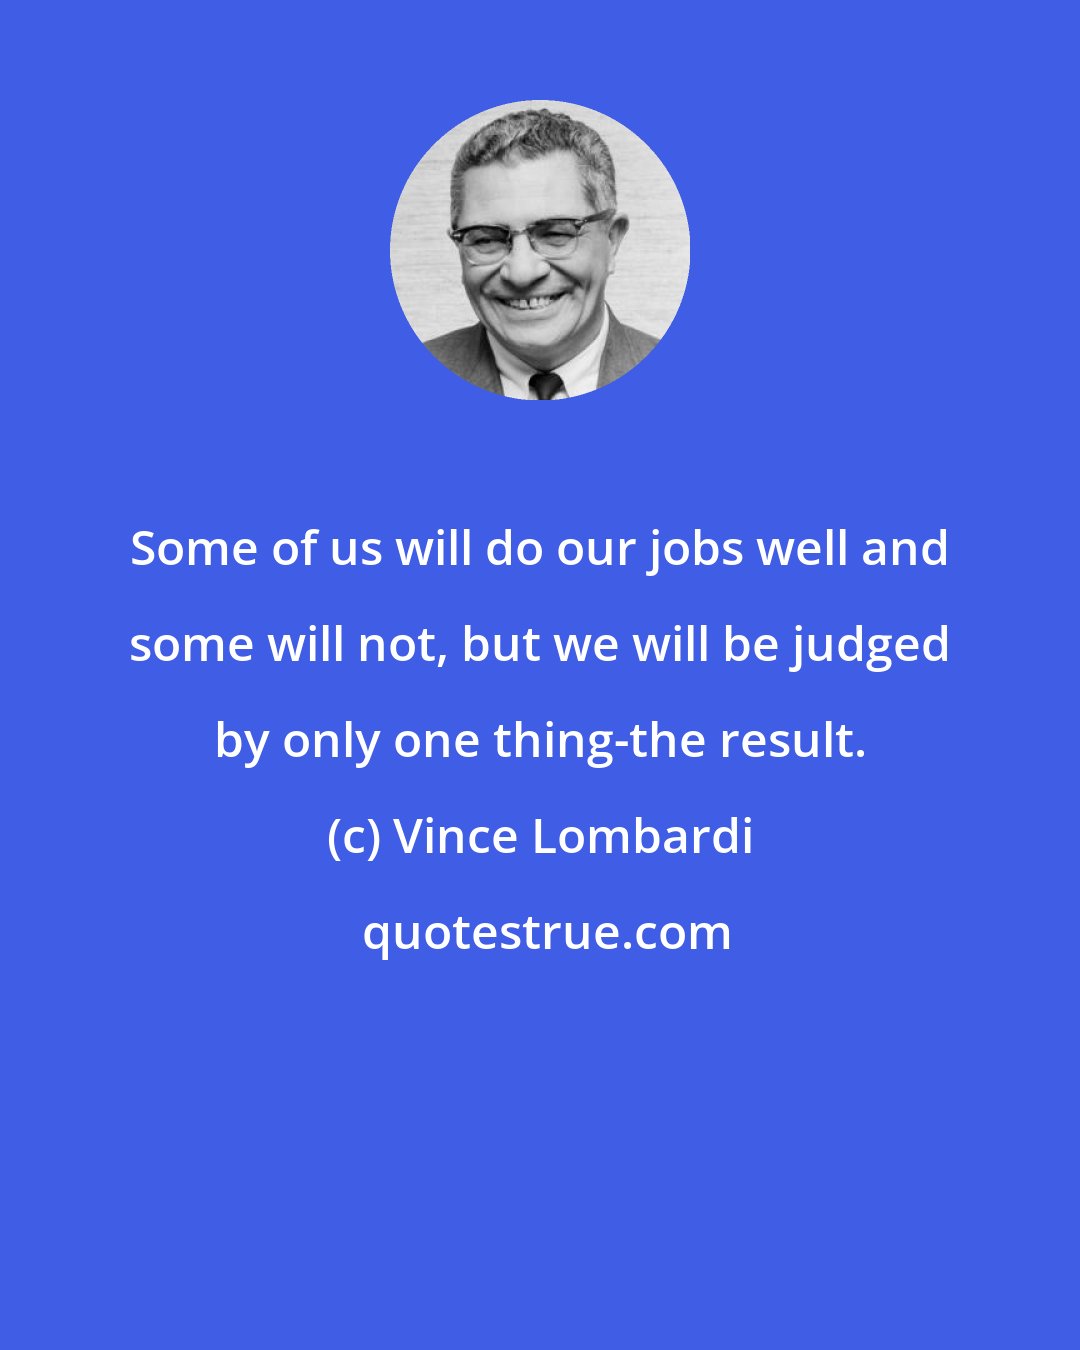 Vince Lombardi: Some of us will do our jobs well and some will not, but we will be judged by only one thing-the result.